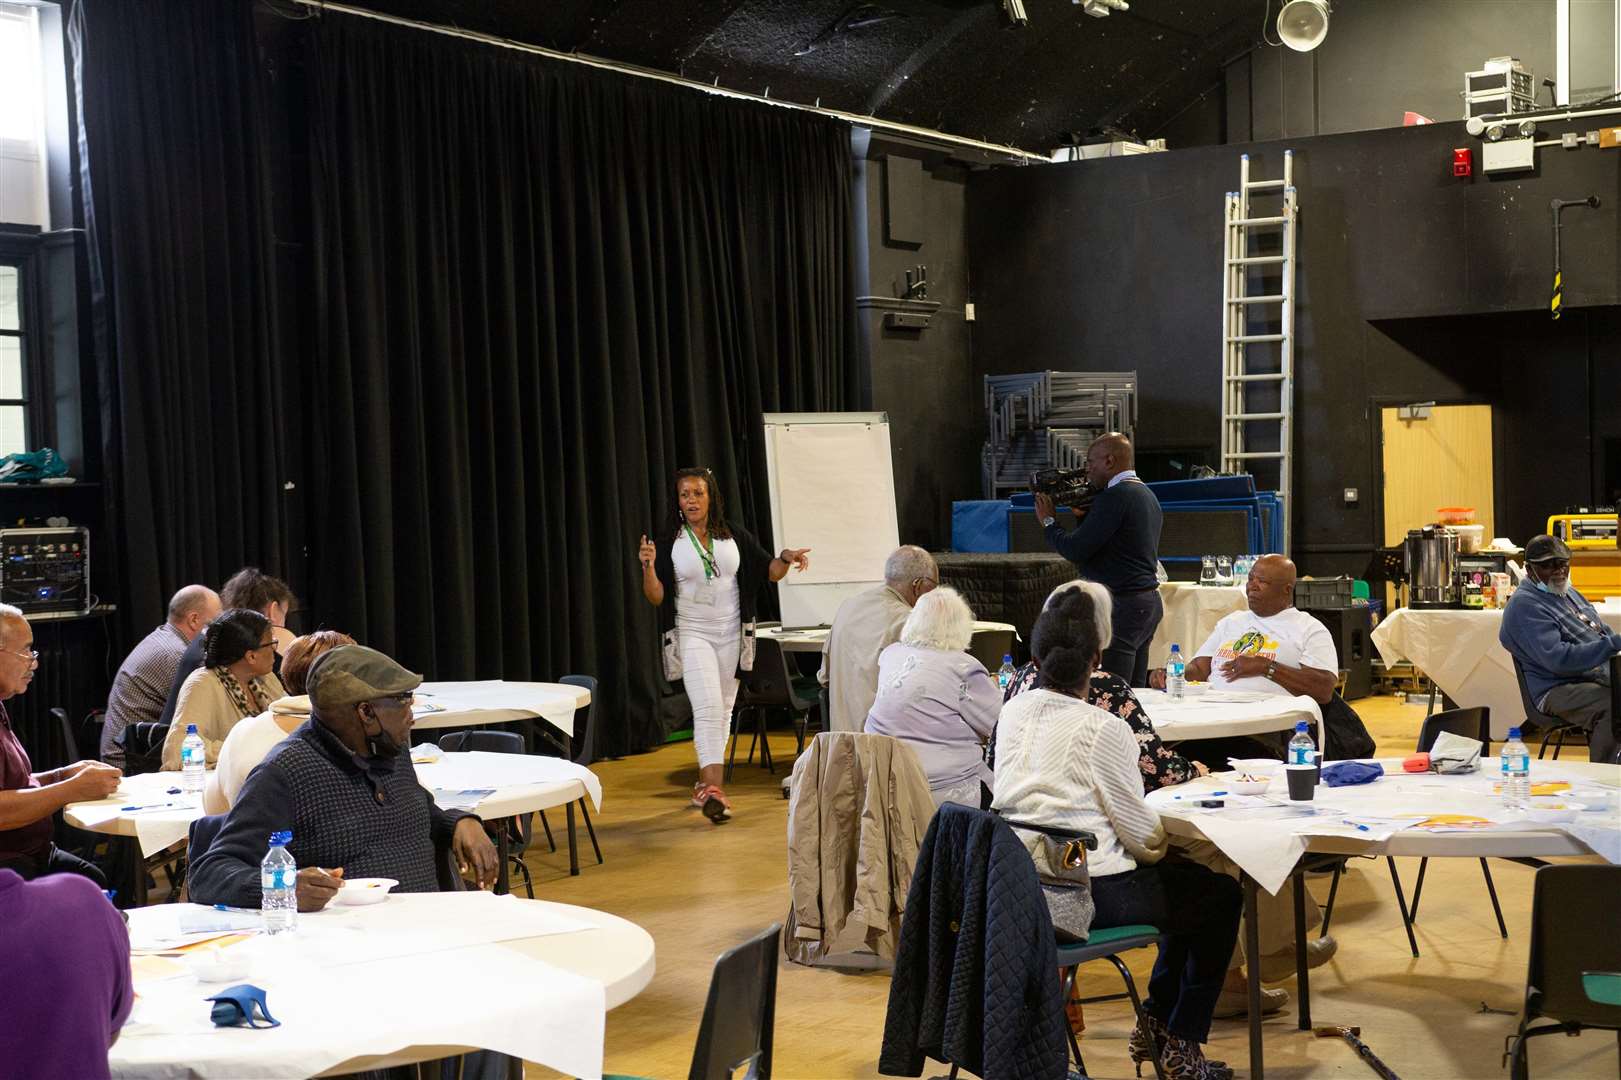 Medway African and Caribbean Association will aim to encourage more black people to become donors. Photo: MACA